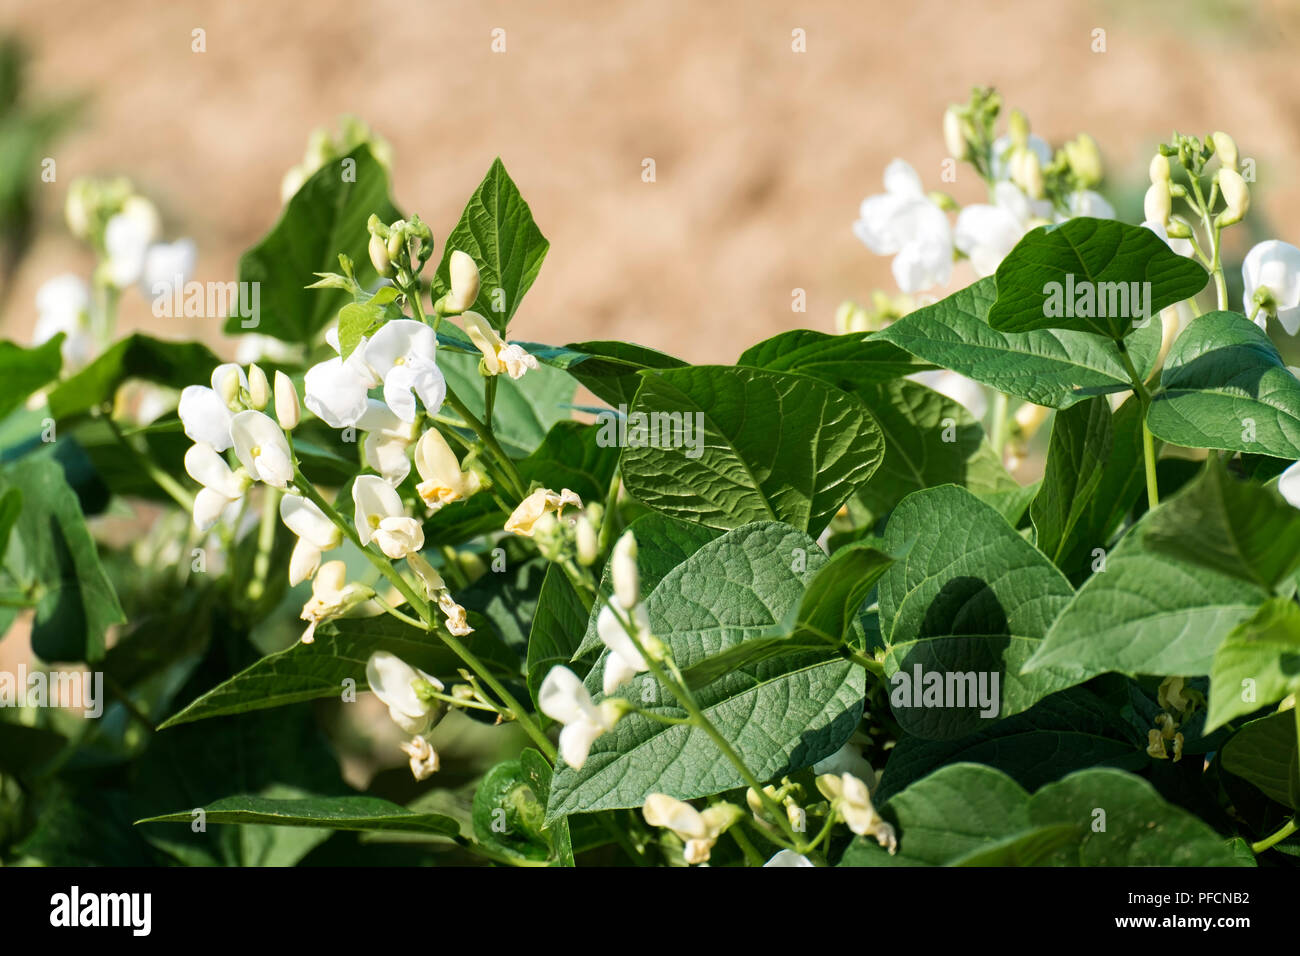 Flowers and leaves of beans (Phaseolus) Stock Photo